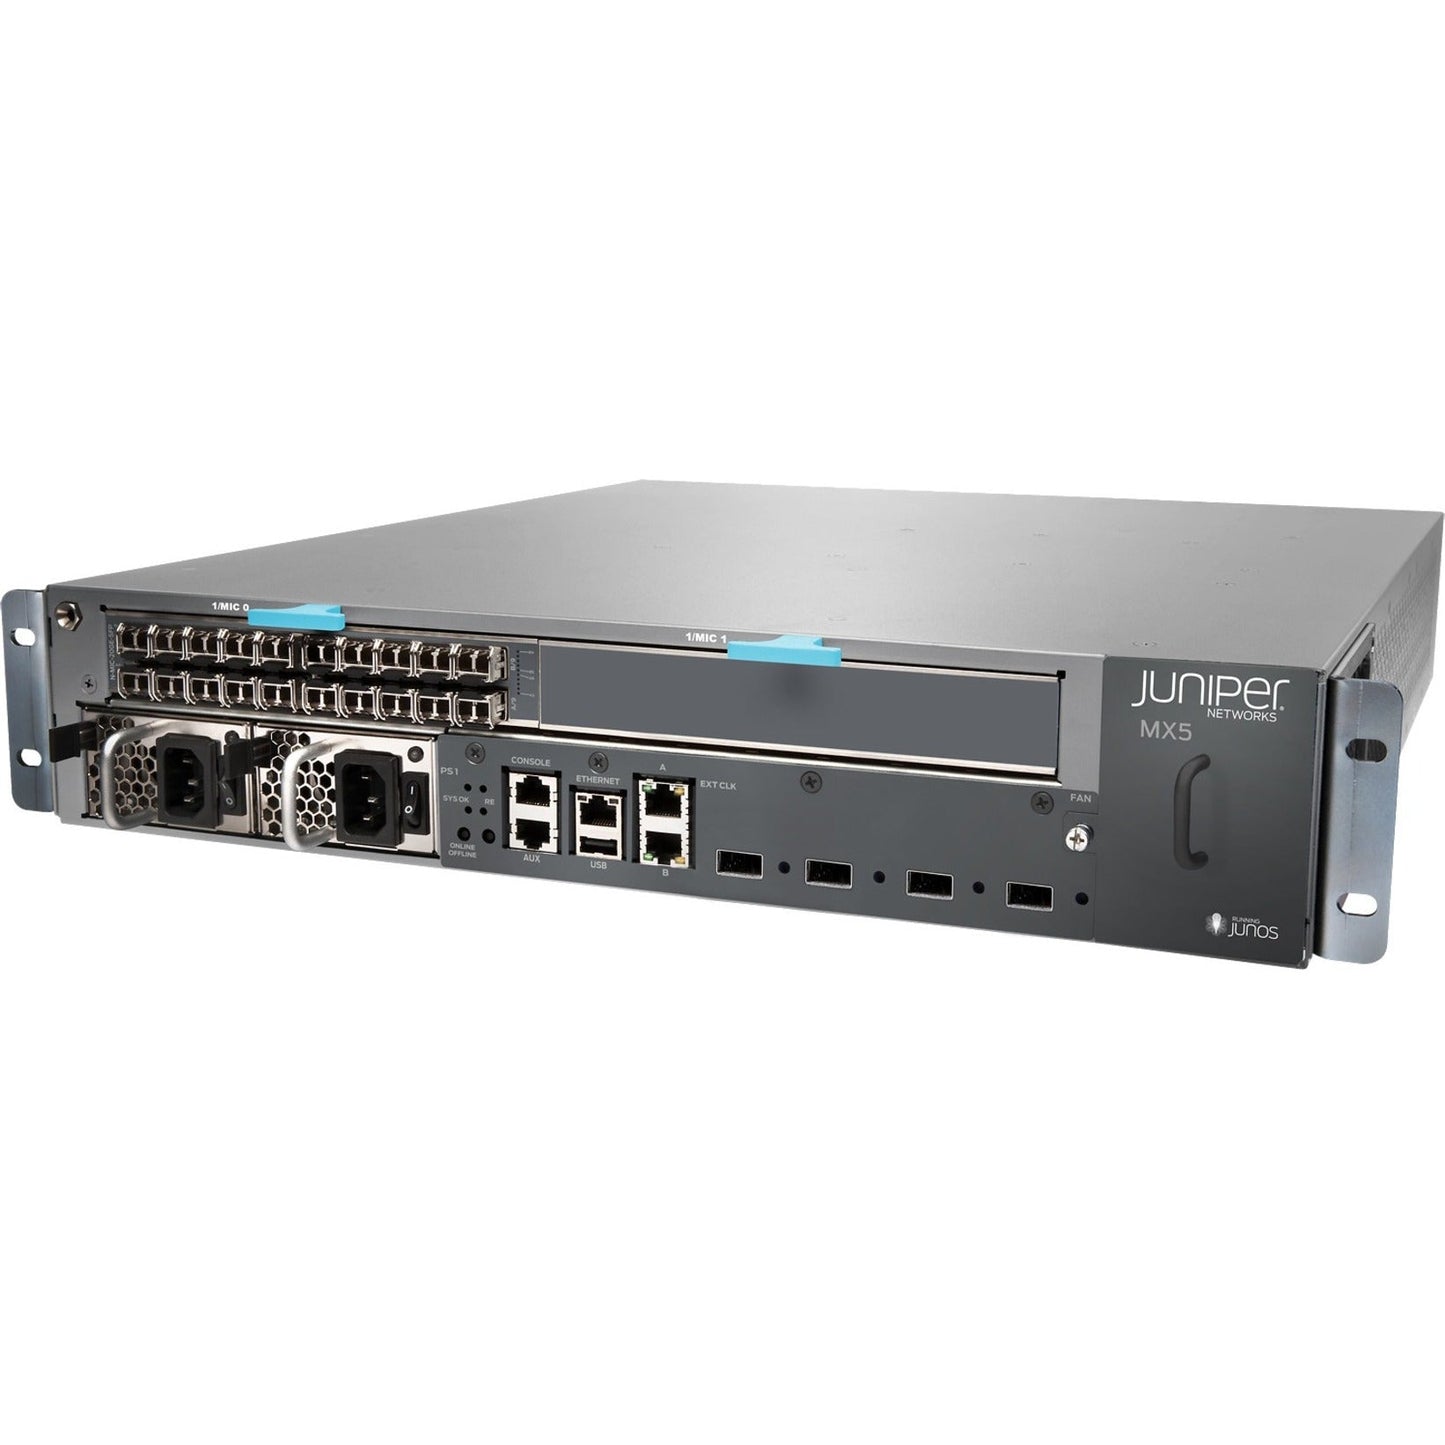 Juniper MX5 Router Chassis